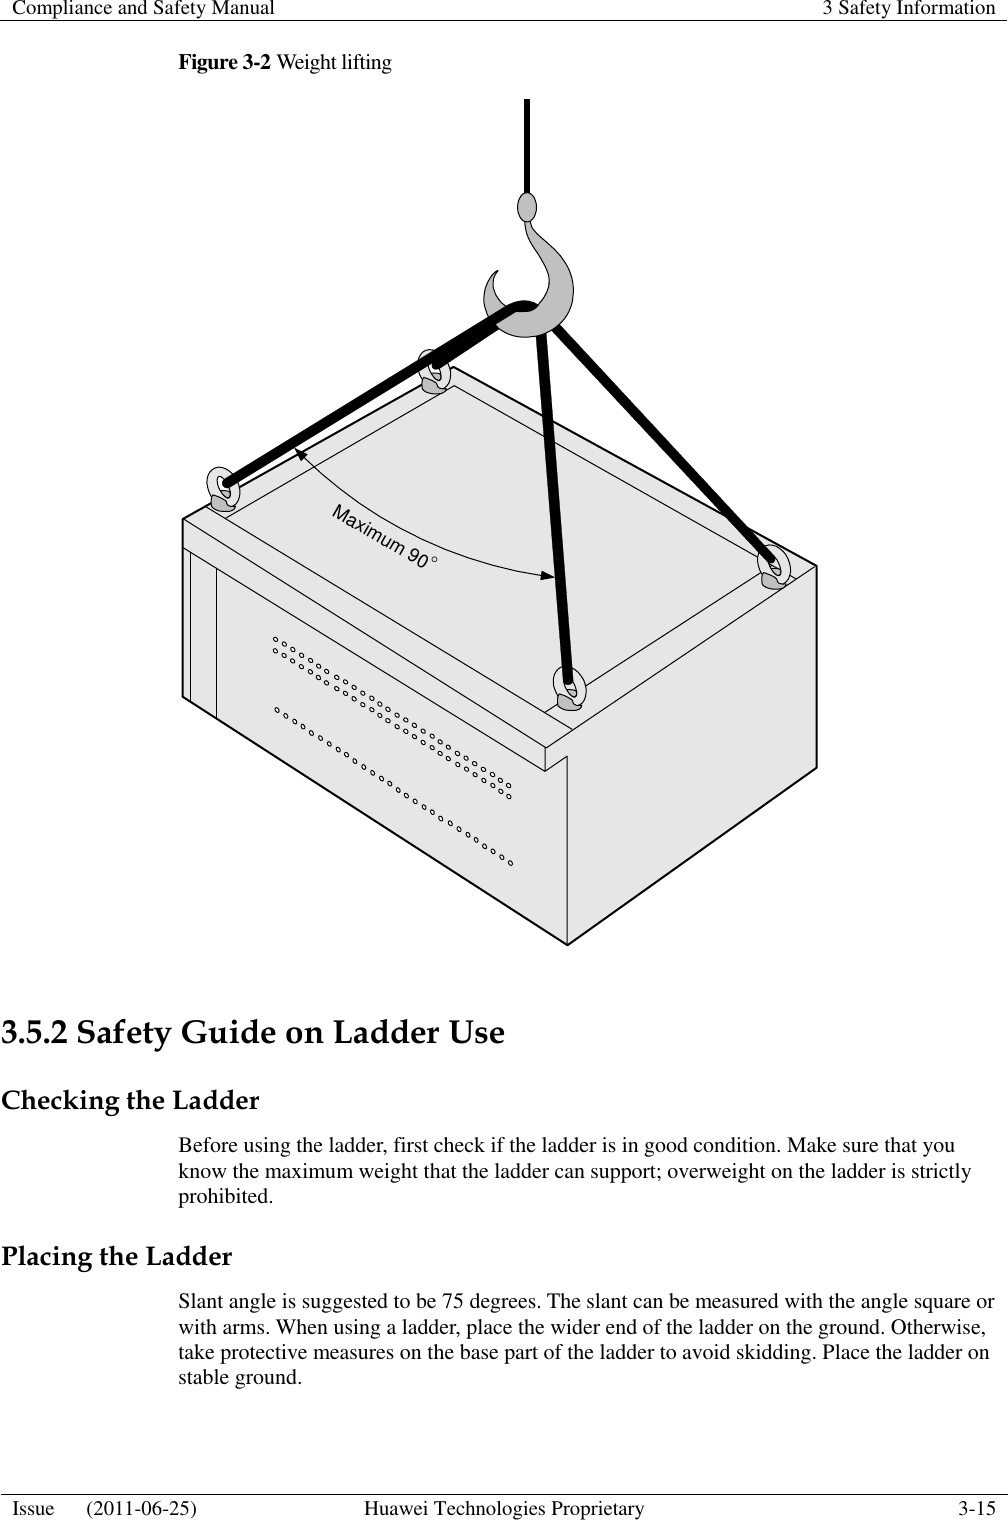 Compliance and Safety Manual 3 Safety Information  Issue      (2011-06-25) Huawei Technologies Proprietary 3-15  Figure 3-2 Weight lifting Maximum 90  3.5.2 Safety Guide on Ladder Use Checking the Ladder Before using the ladder, first check if the ladder is in good condition. Make sure that you know the maximum weight that the ladder can support; overweight on the ladder is strictly prohibited. Placing the Ladder Slant angle is suggested to be 75 degrees. The slant can be measured with the angle square or with arms. When using a ladder, place the wider end of the ladder on the ground. Otherwise, take protective measures on the base part of the ladder to avoid skidding. Place the ladder on stable ground. 